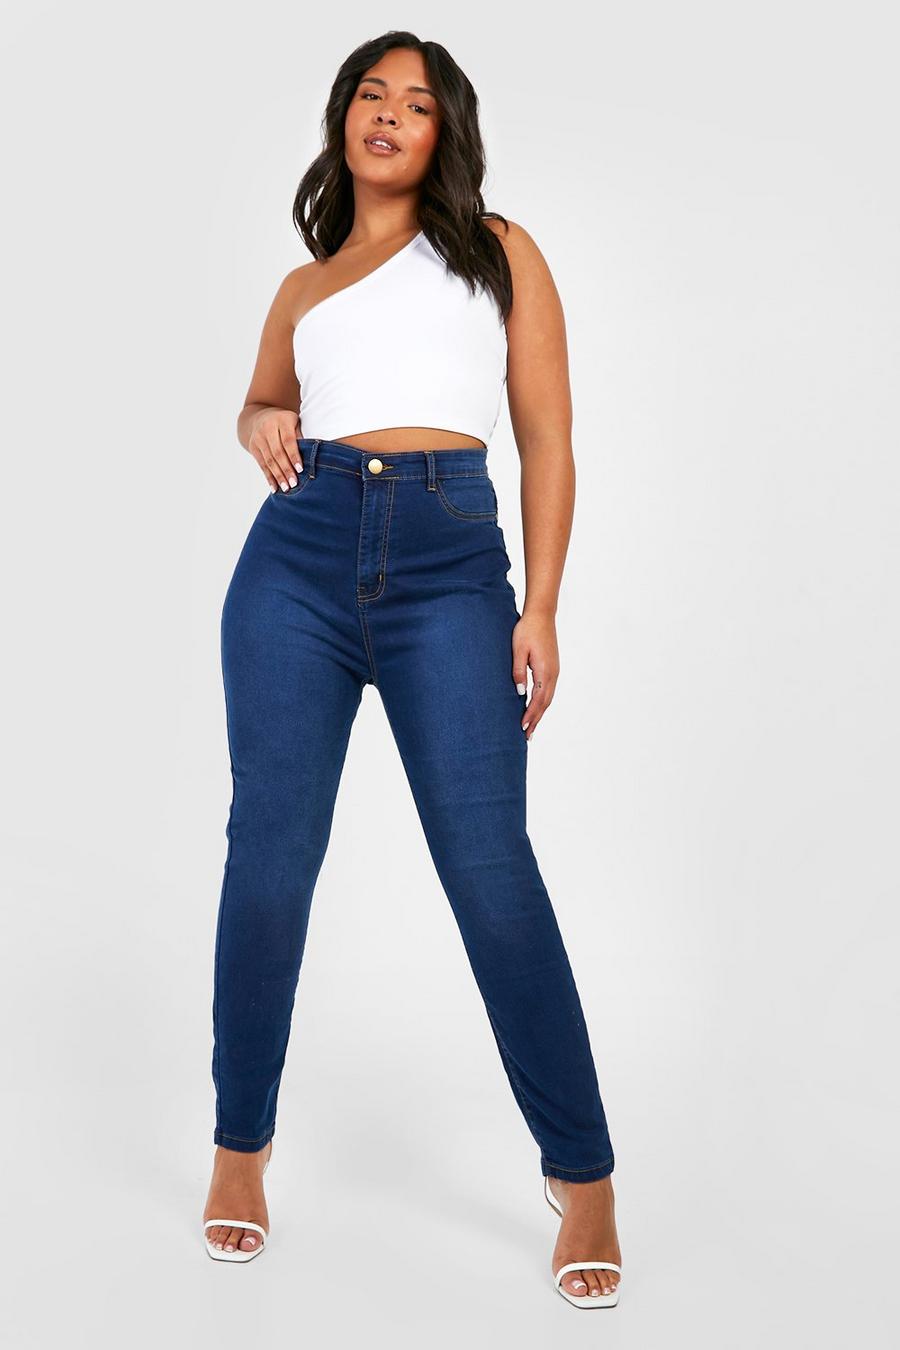 Fashion World - 👖👖 With our denim jeggings as your base